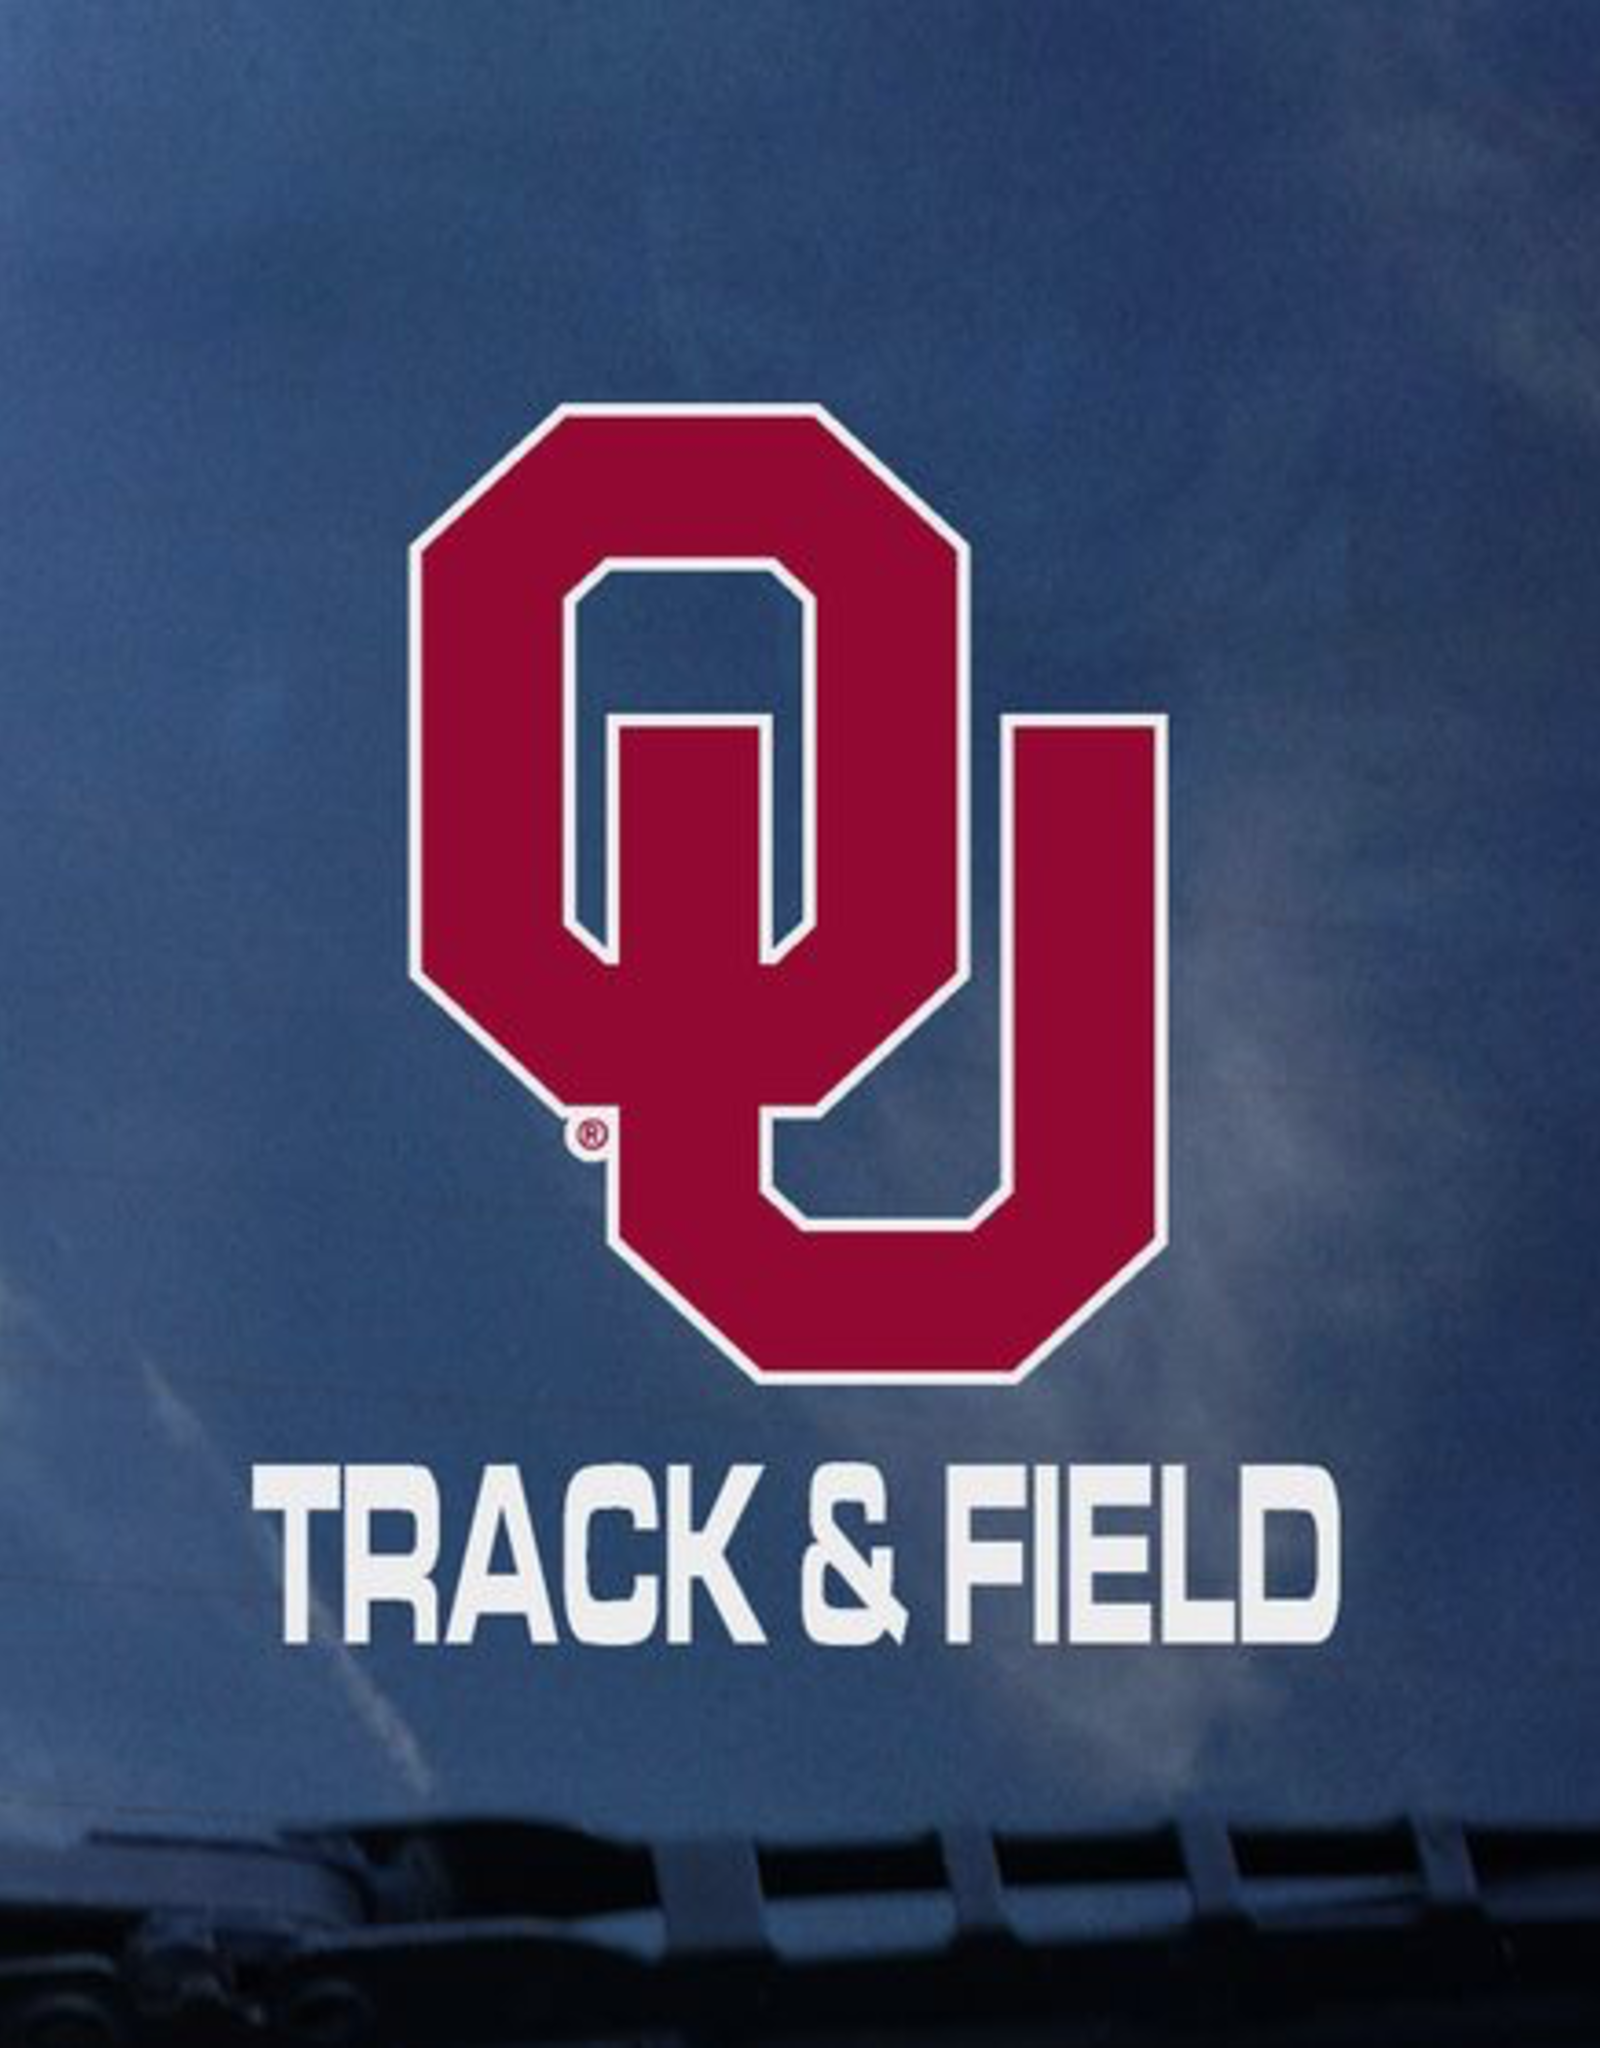 Color Shock OU Track & Field Auto Decal 3.5"x3.5"